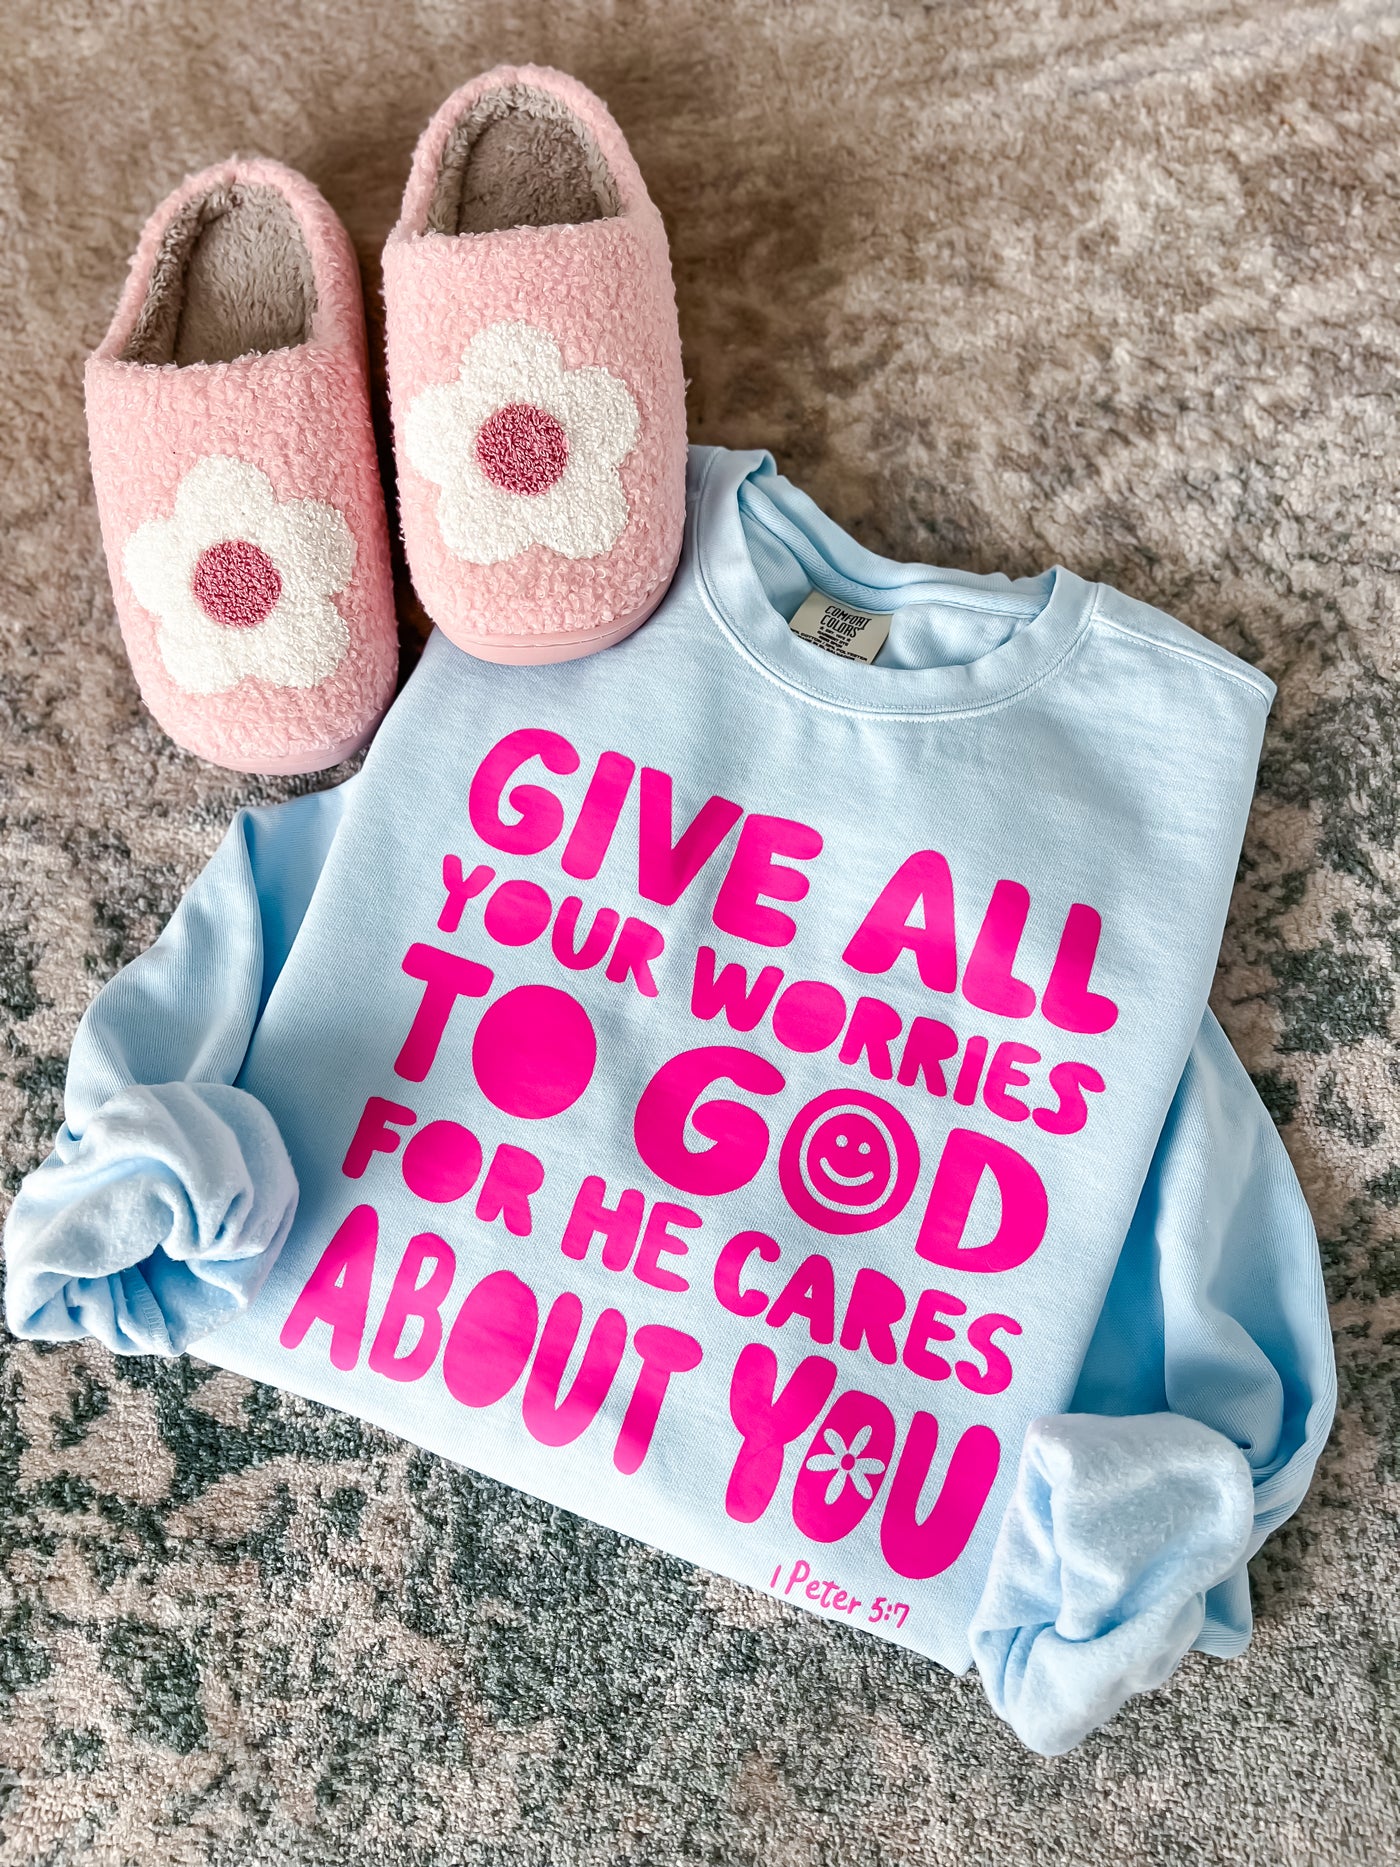 READY-TO-SHIP "Give All Your Worries to God” Sweatshirt